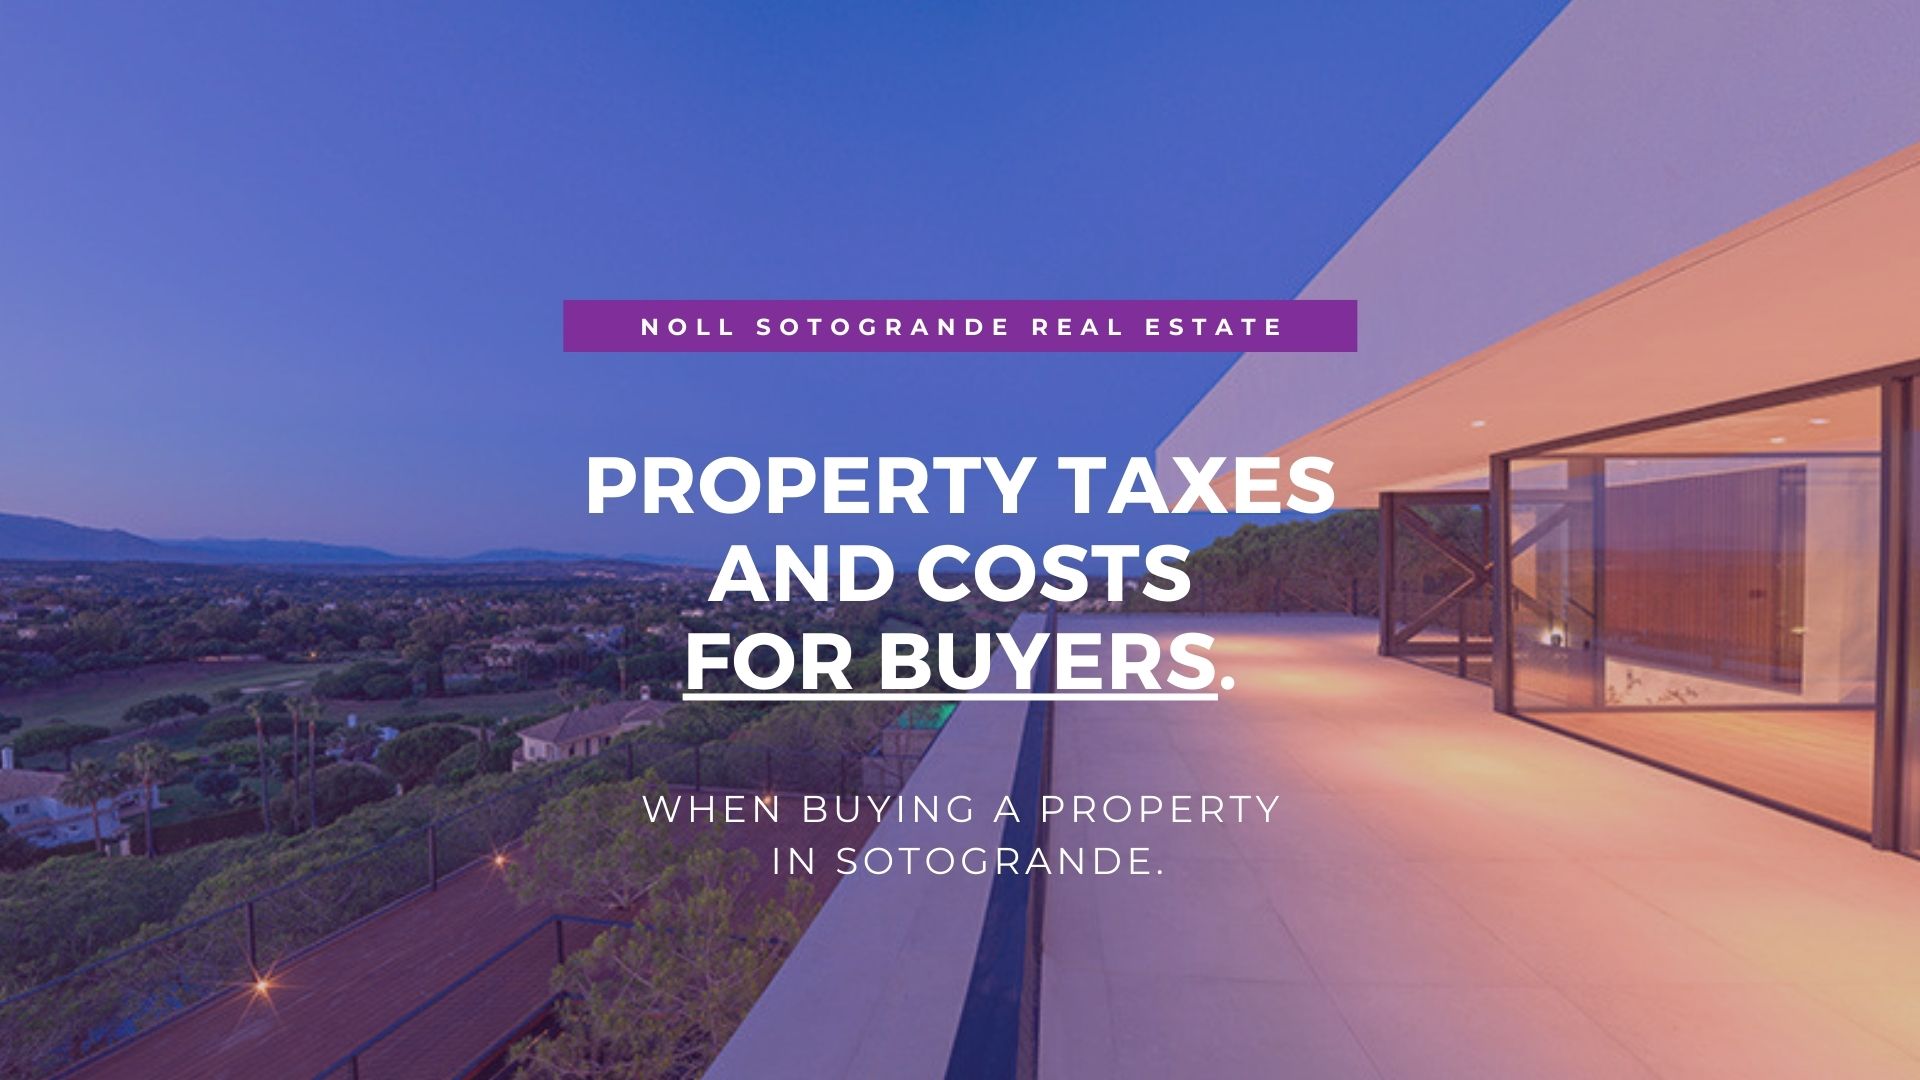 01 - Property Taxes and Costs for BUYERS in Sotogrande Marbella Spain